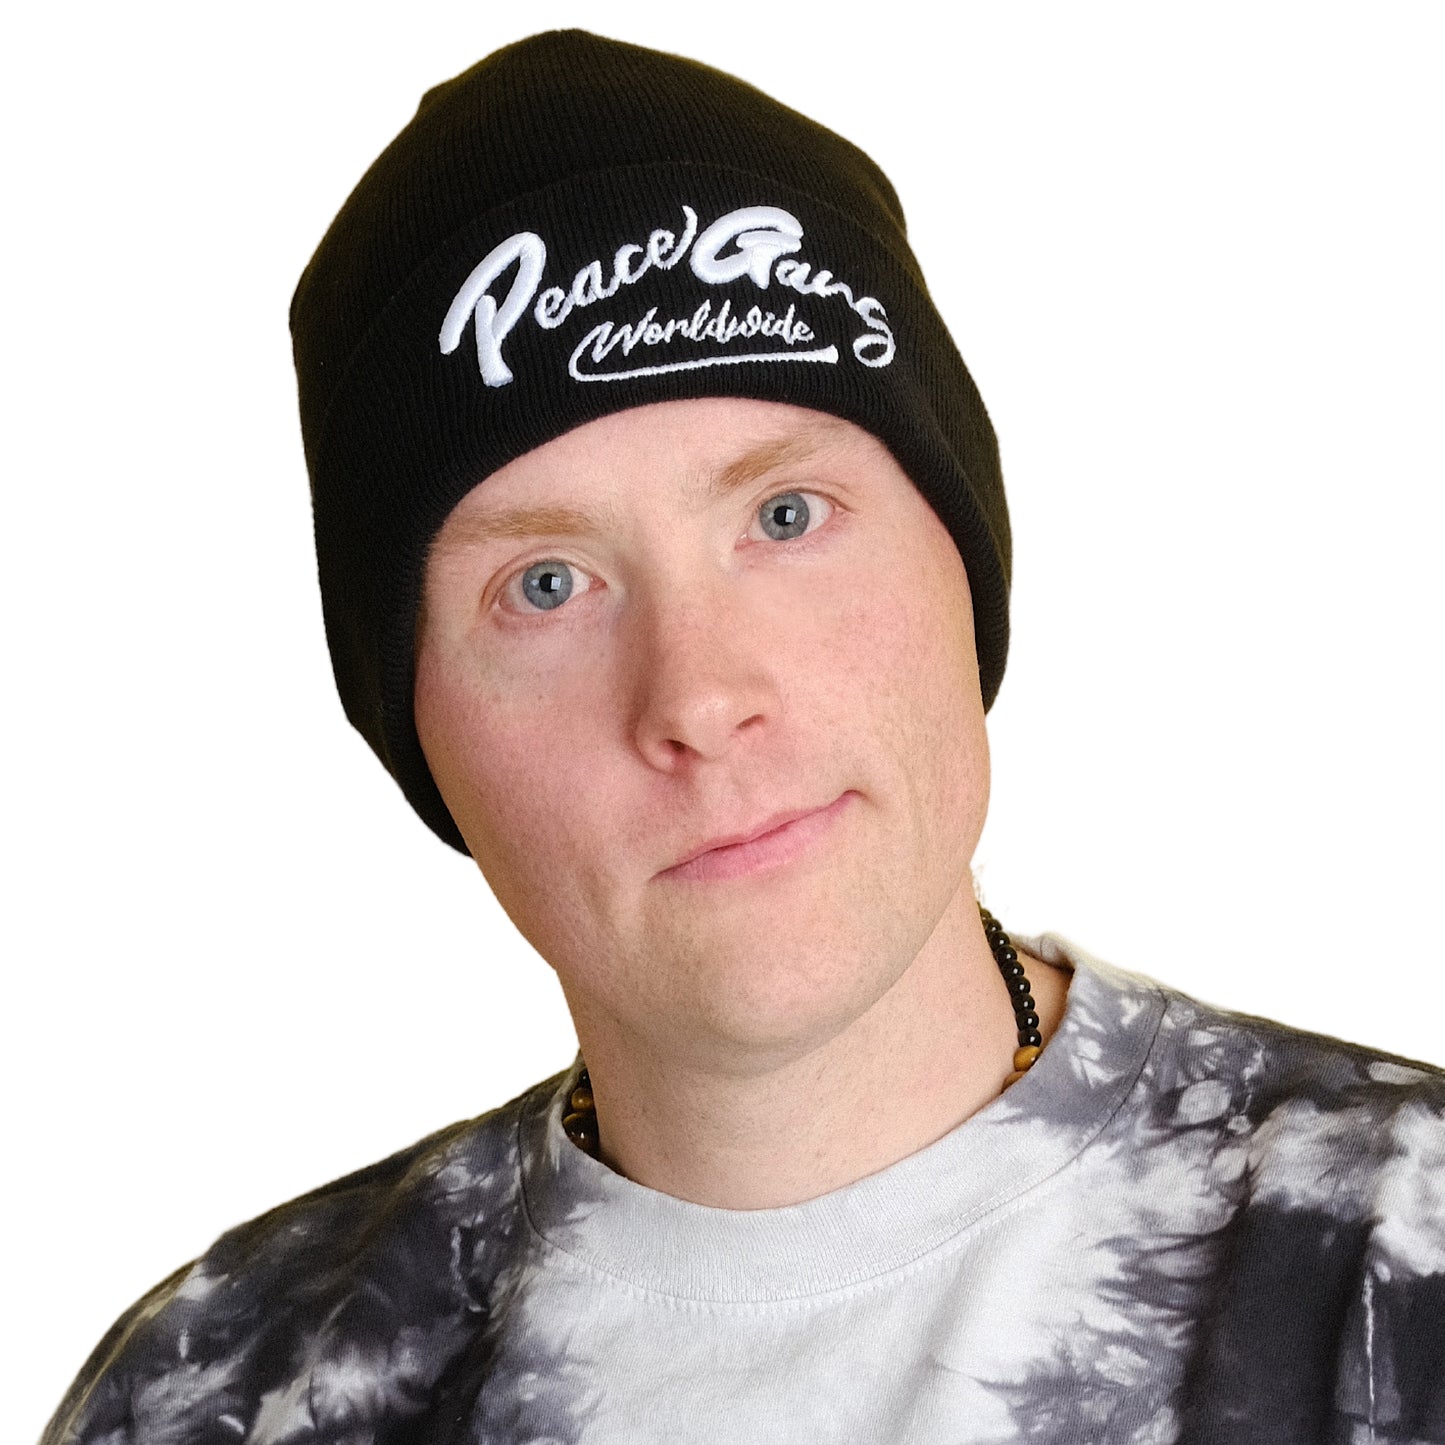 "Worldwide"  Embroidered Beanie - PEACE GANG